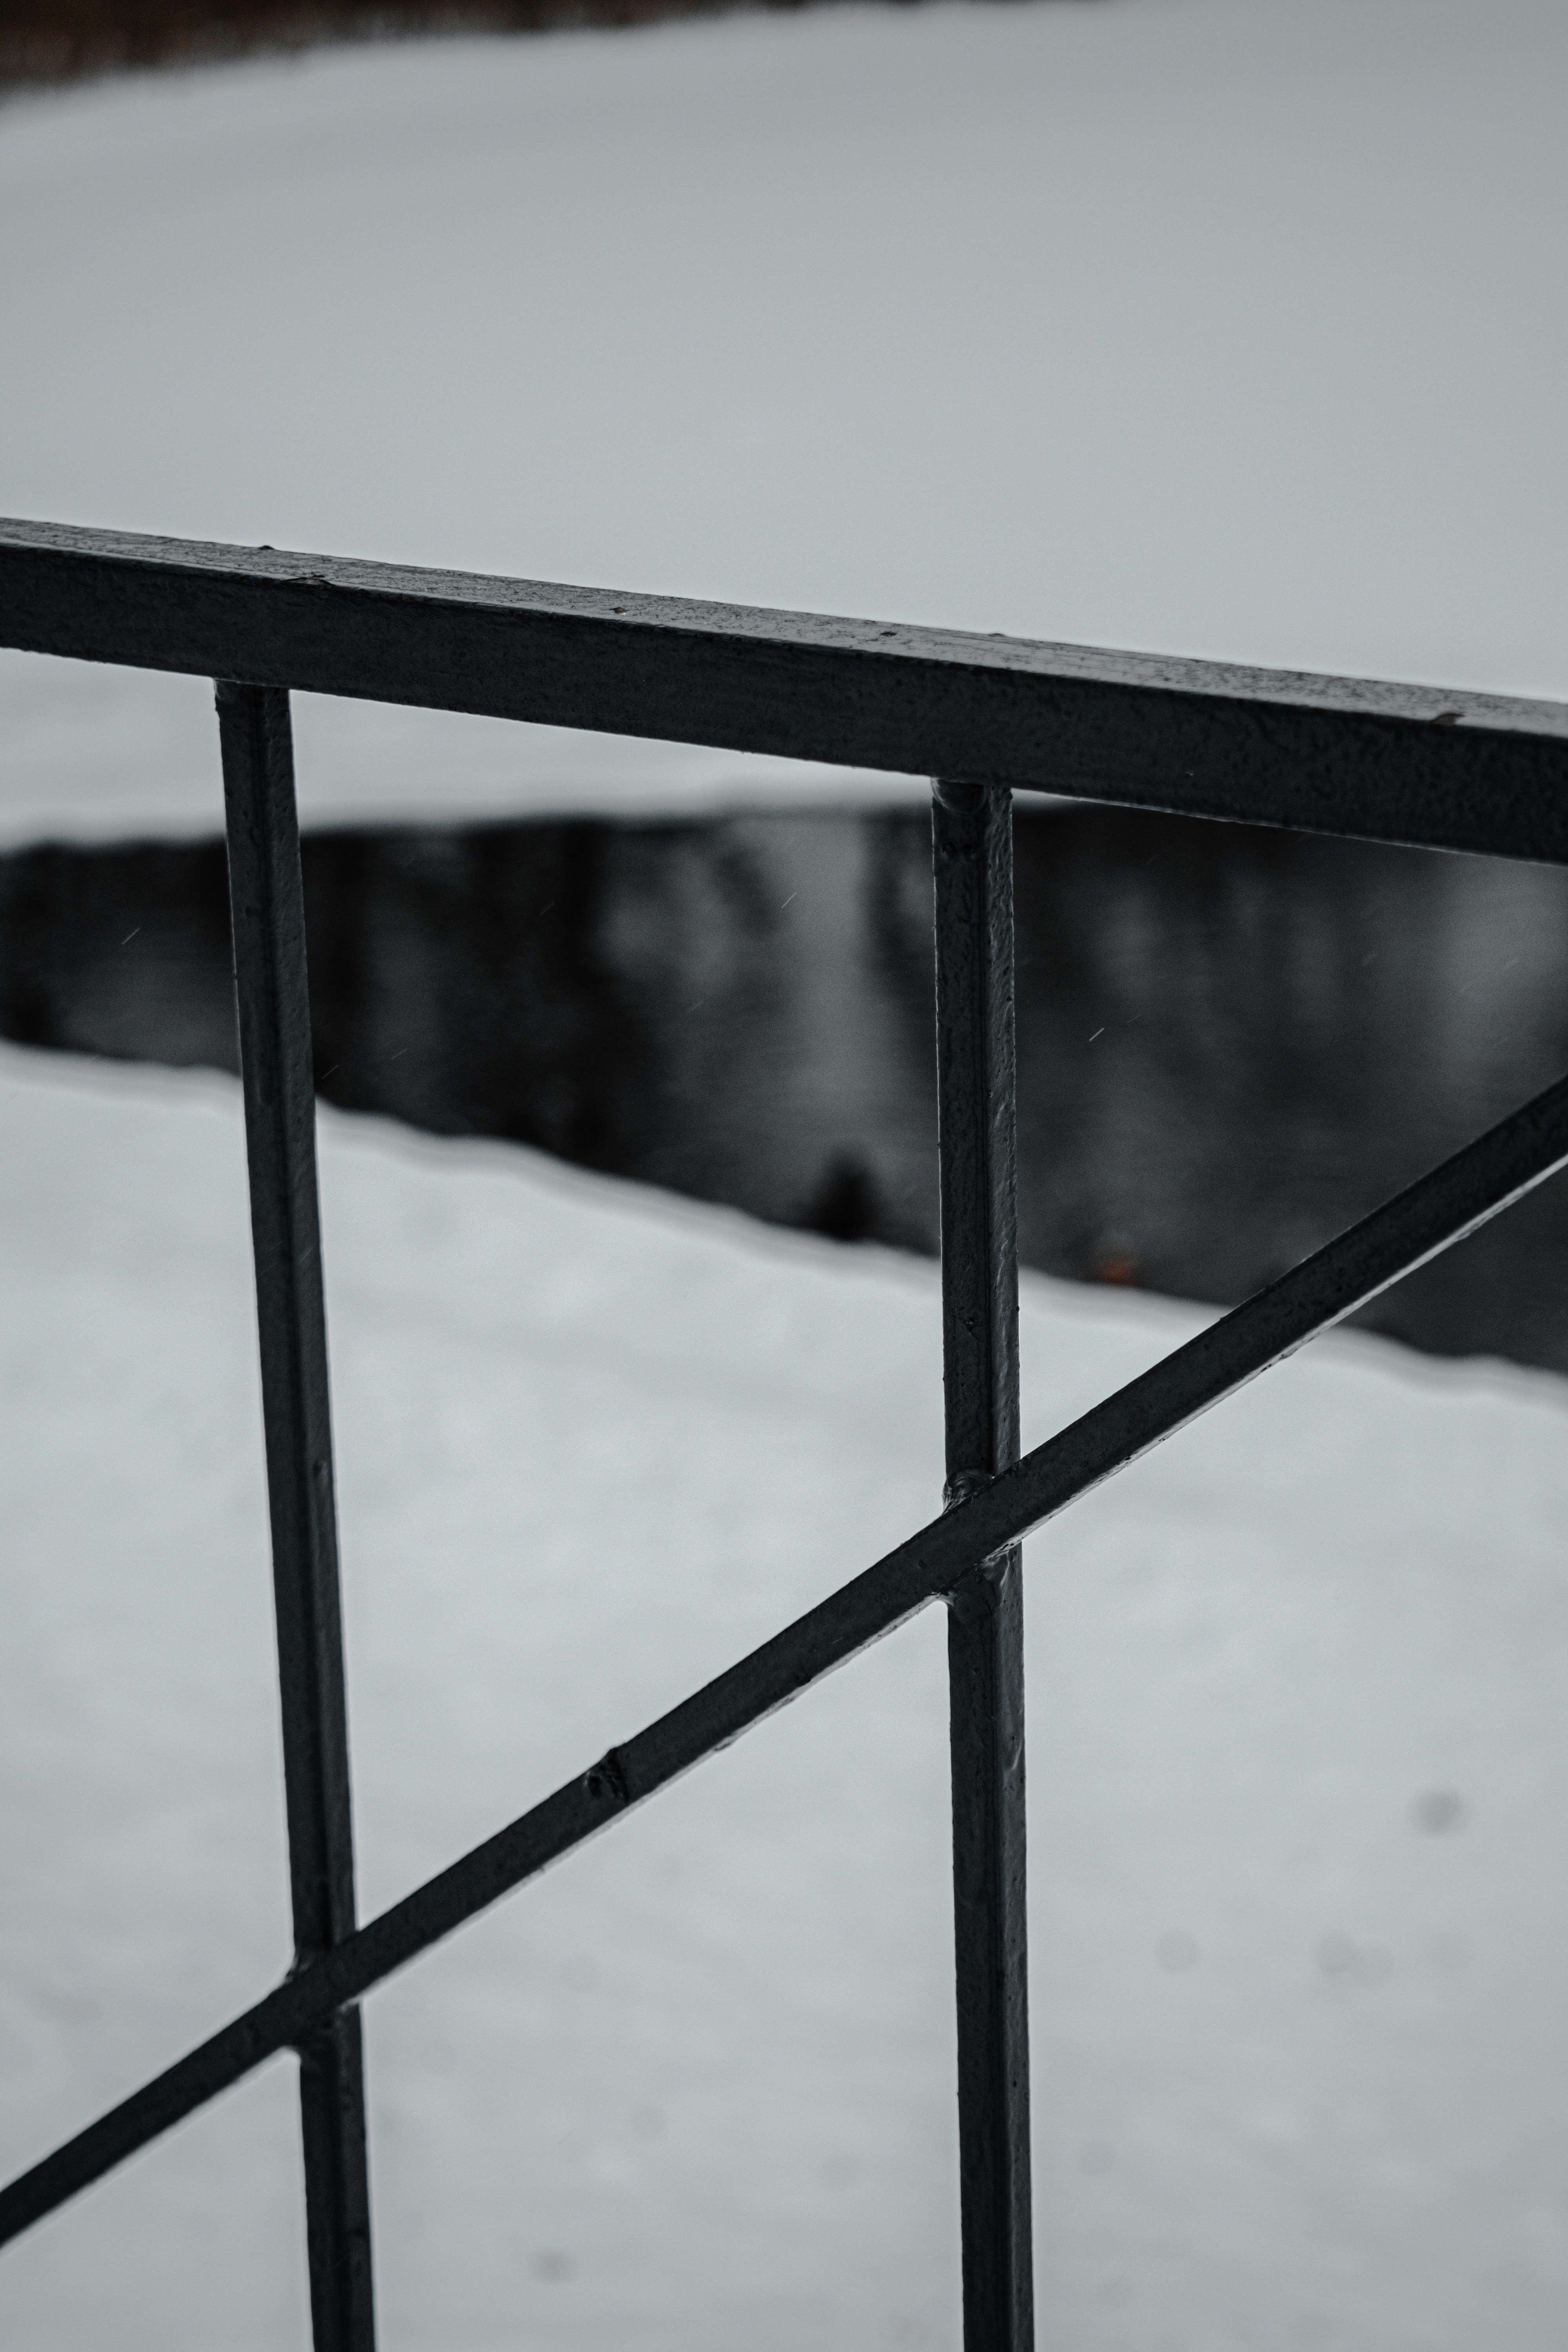 snow covered black metal fence